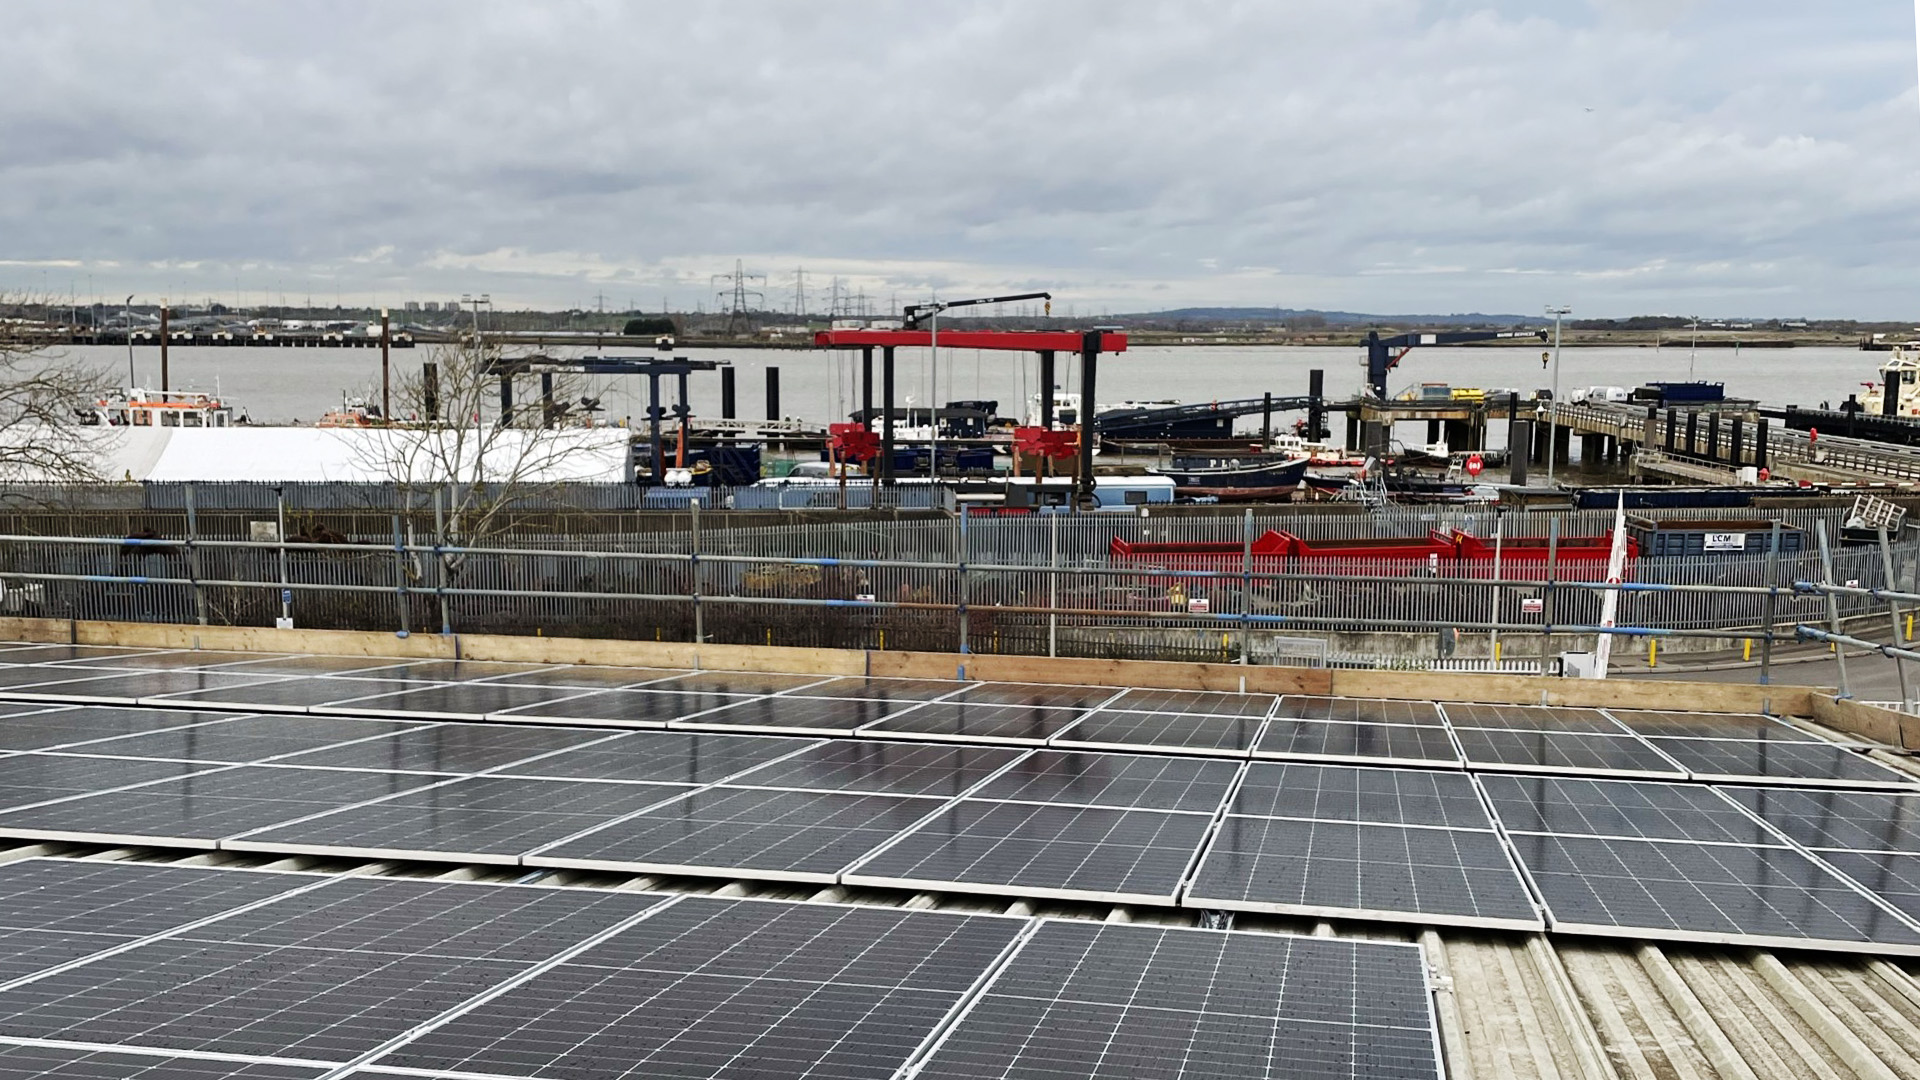 We have installed solar panels on our facilities, including Marine House at Denton Wharf.